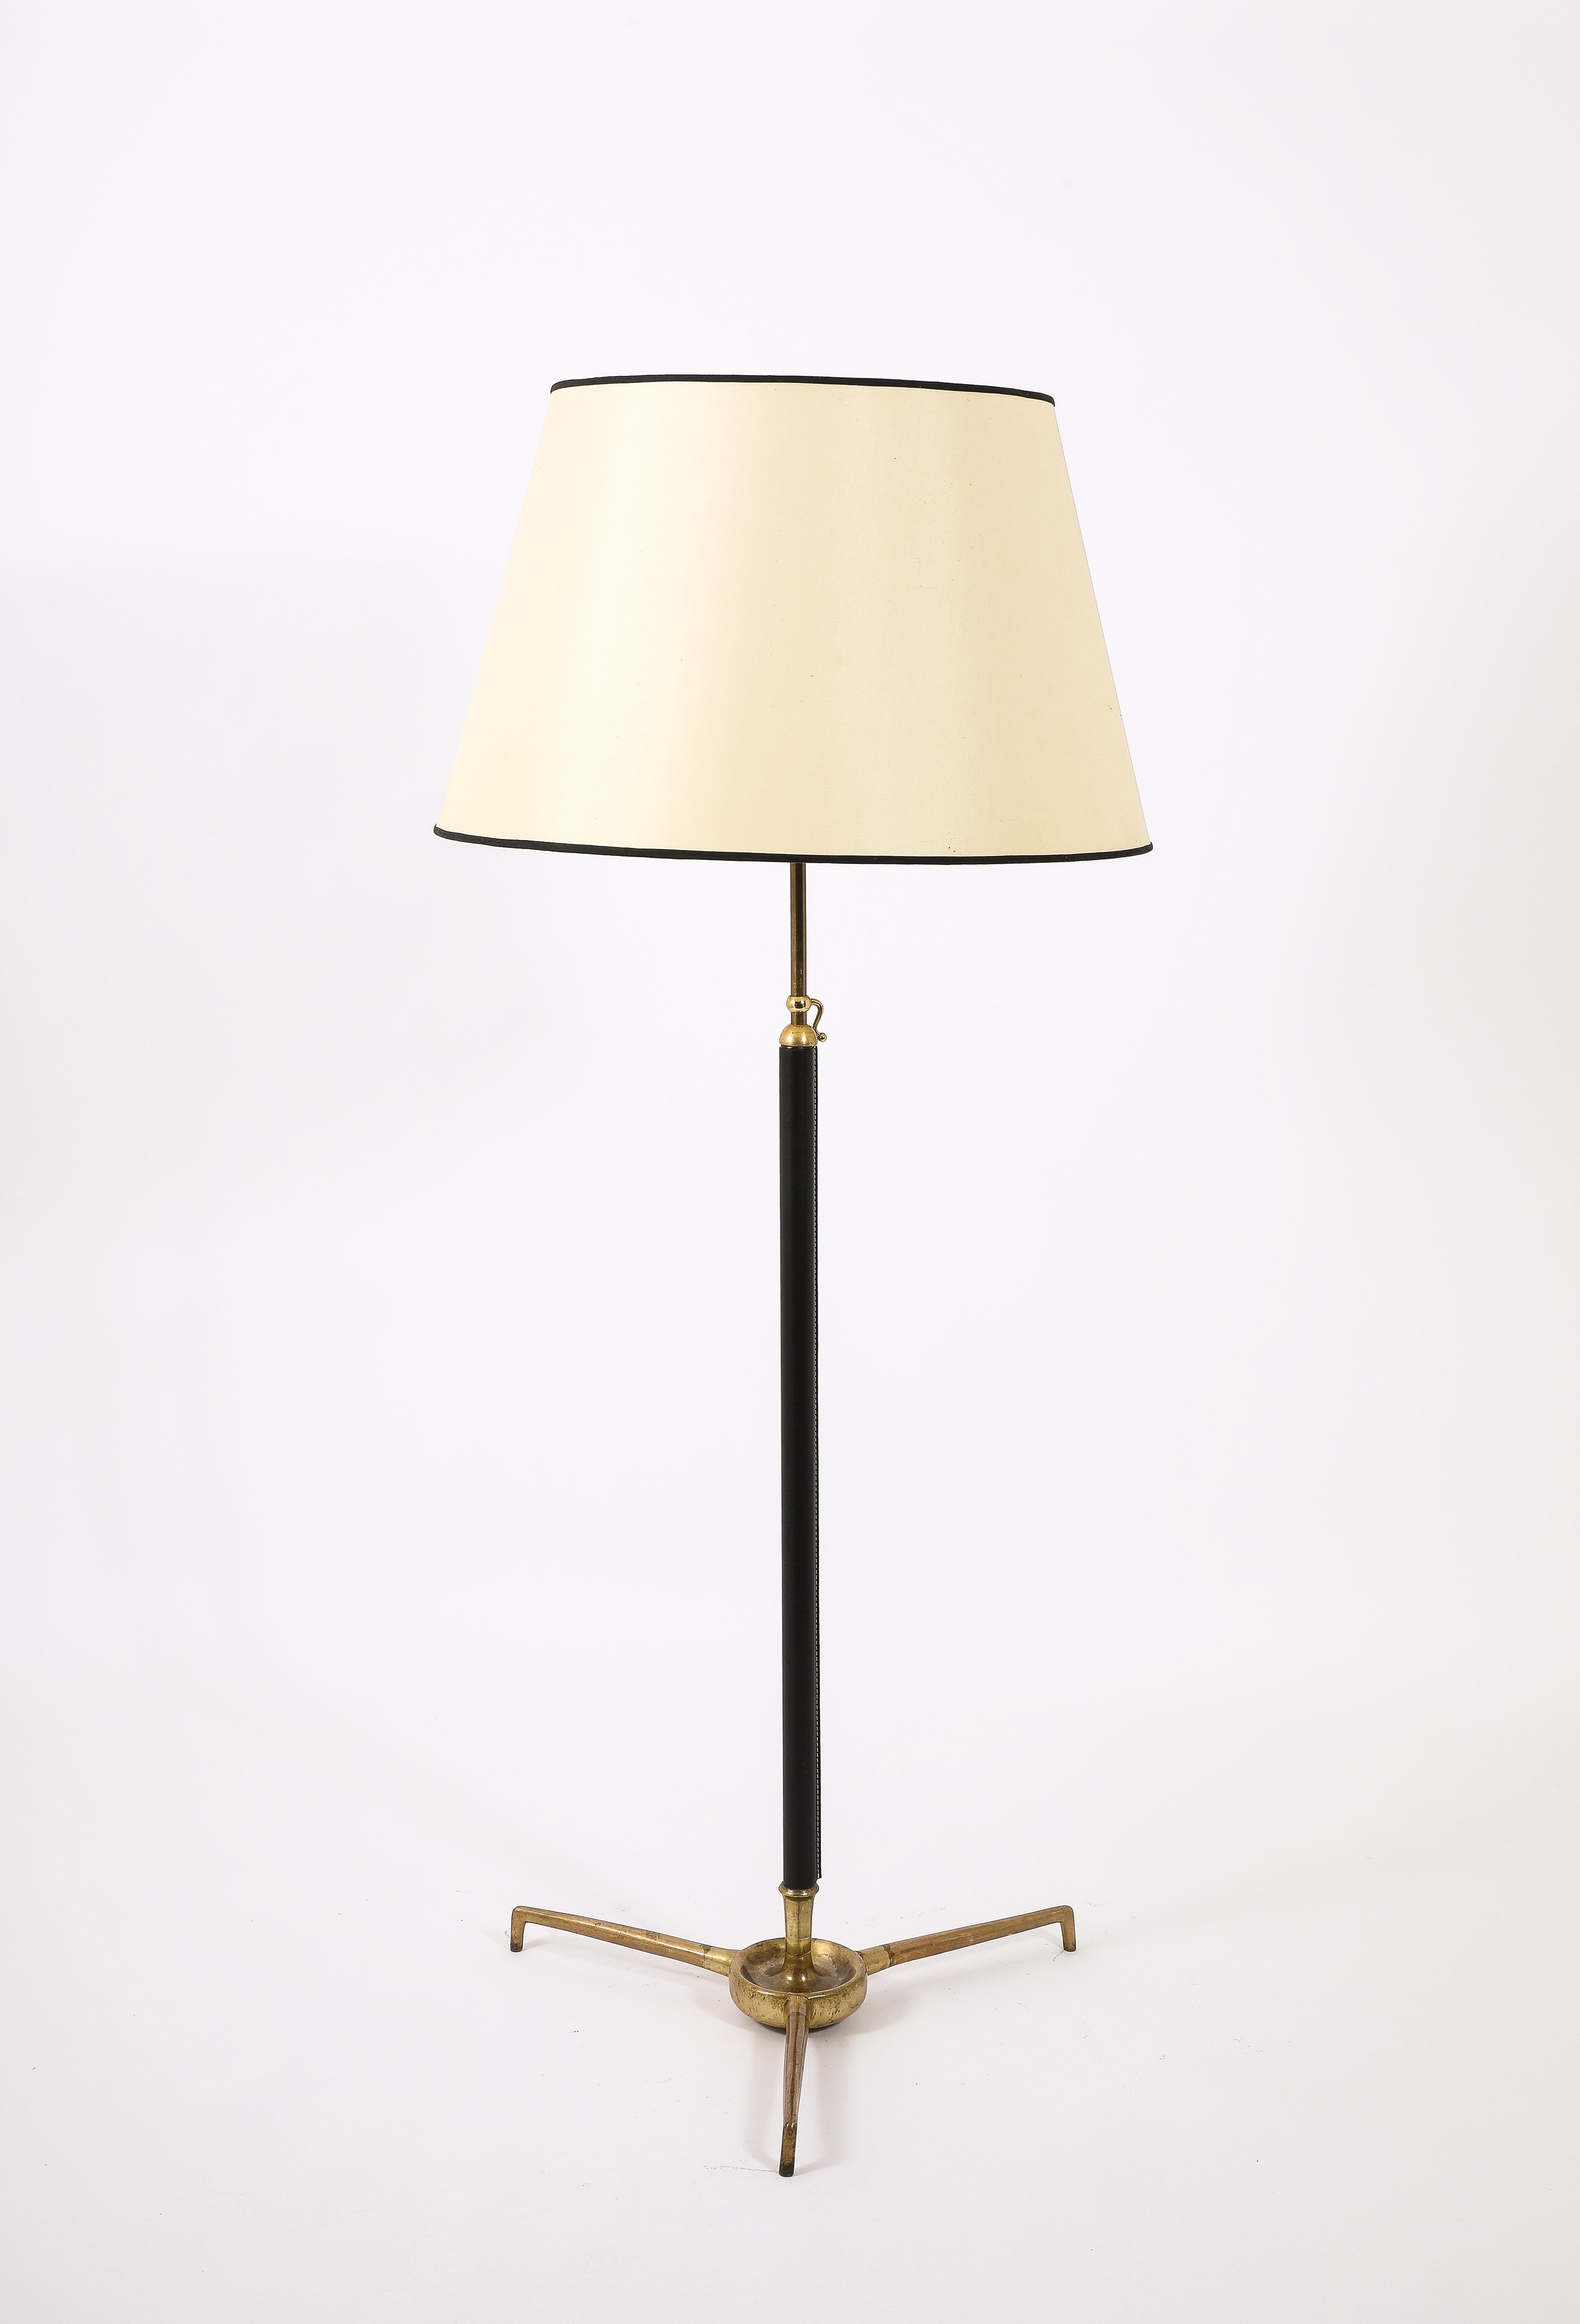 Modern Large Bronze & Leather Floor Lamp by Arlus, France 1950's For Sale